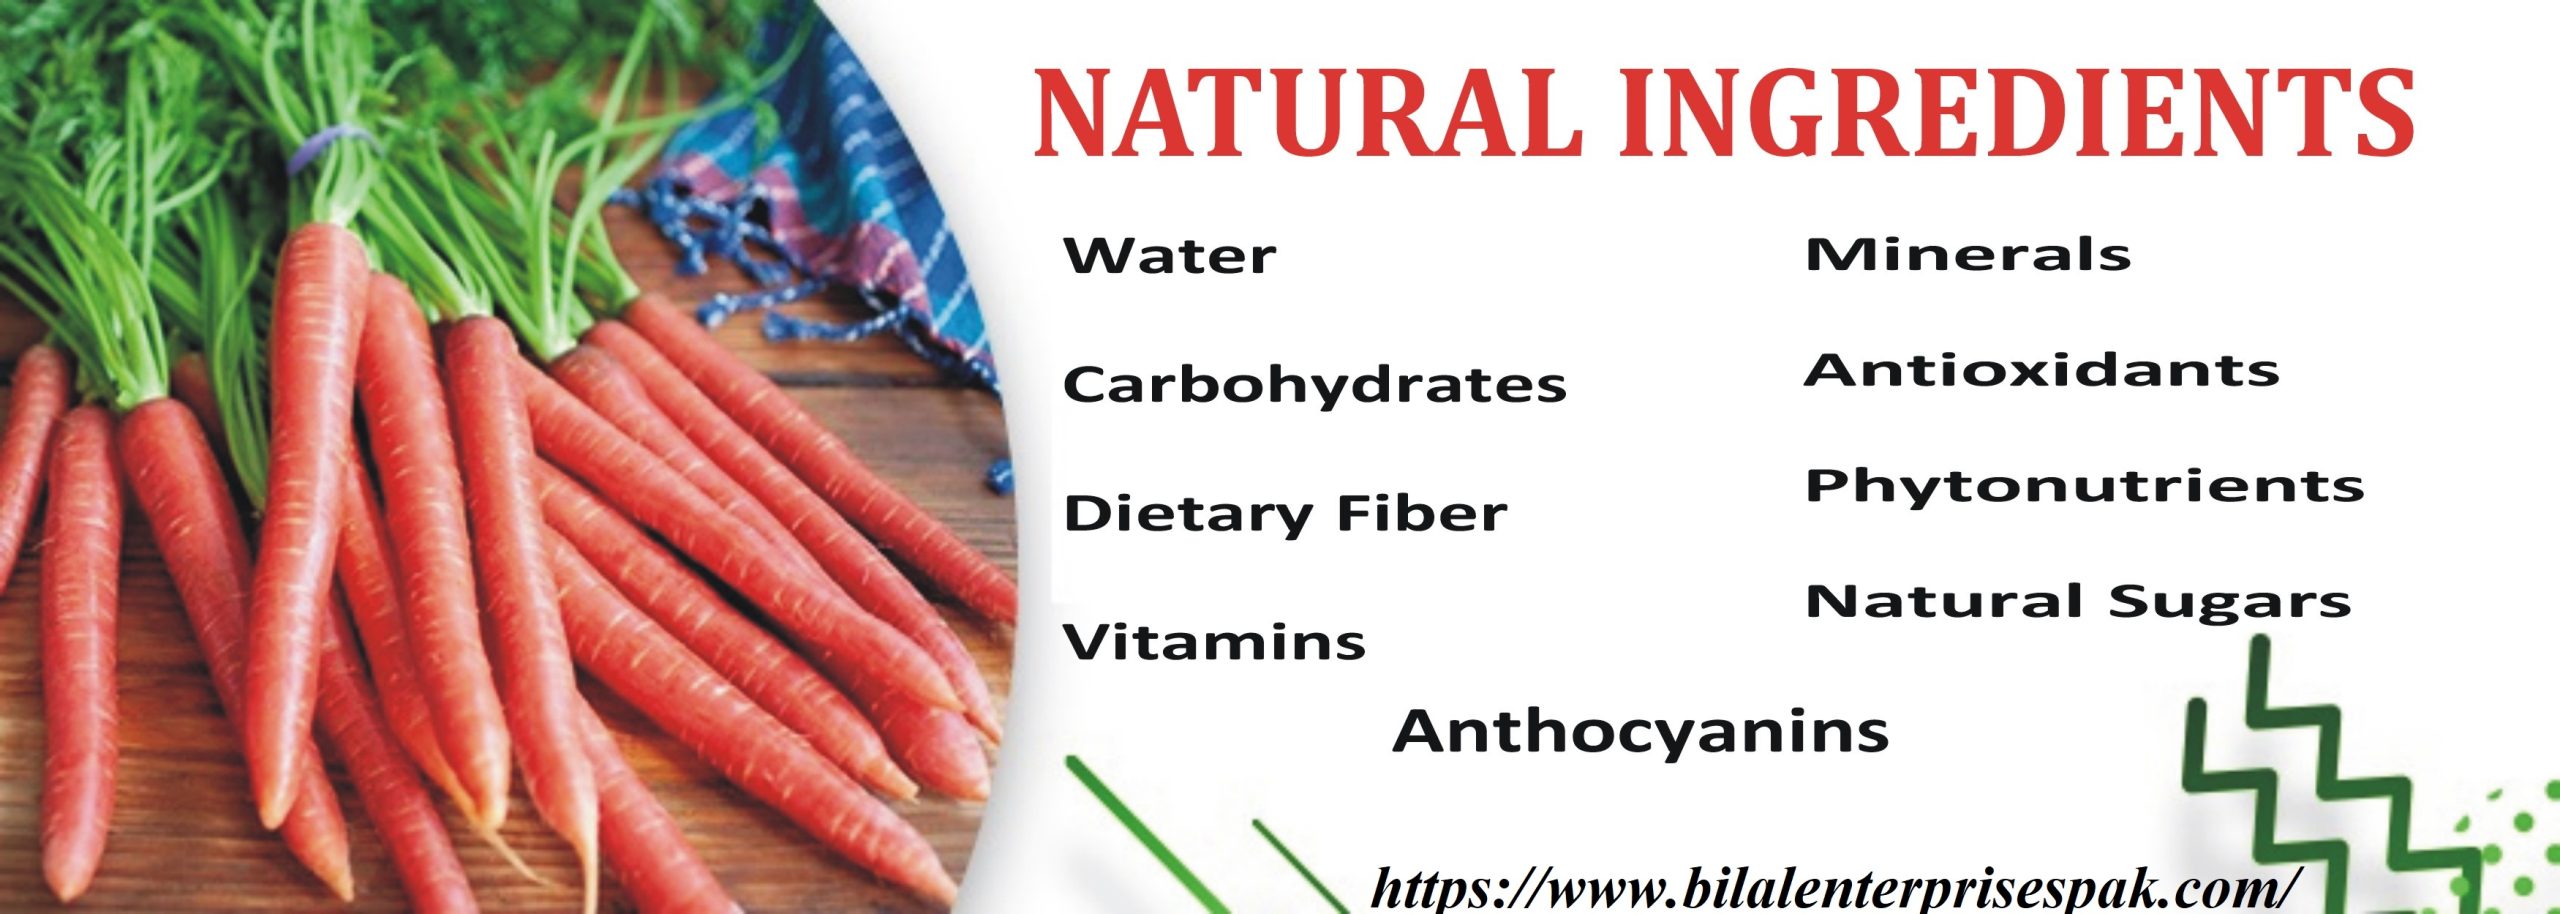  Fresh Red Carrots health benefits 9| Vegetable Super Quality fresh Red Carrots Available with Customized packing from Bilal Enterprises (Import and Export) company in Pakistan. Best Quality Products with best price.bilalenterprisespak@gmail.com 